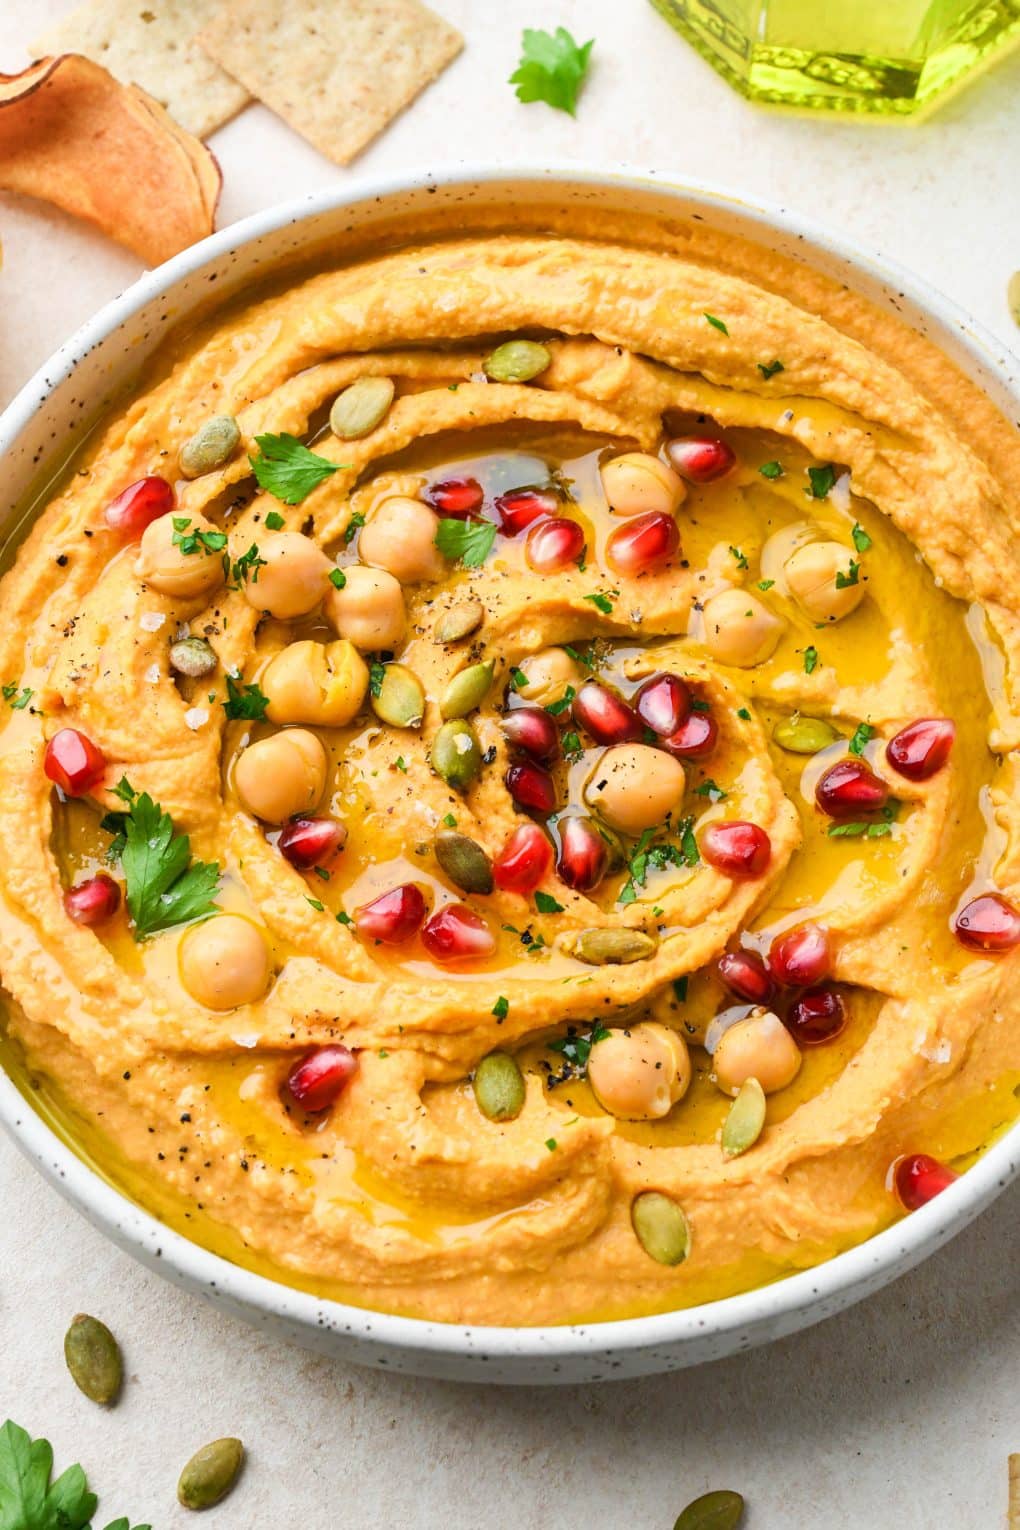 Close up image of a bowl of creamy sweet potato hummus topped with all the things - pomegranate, fresh parsley, olive oil, chickpeas, and flaky salt and pepper.